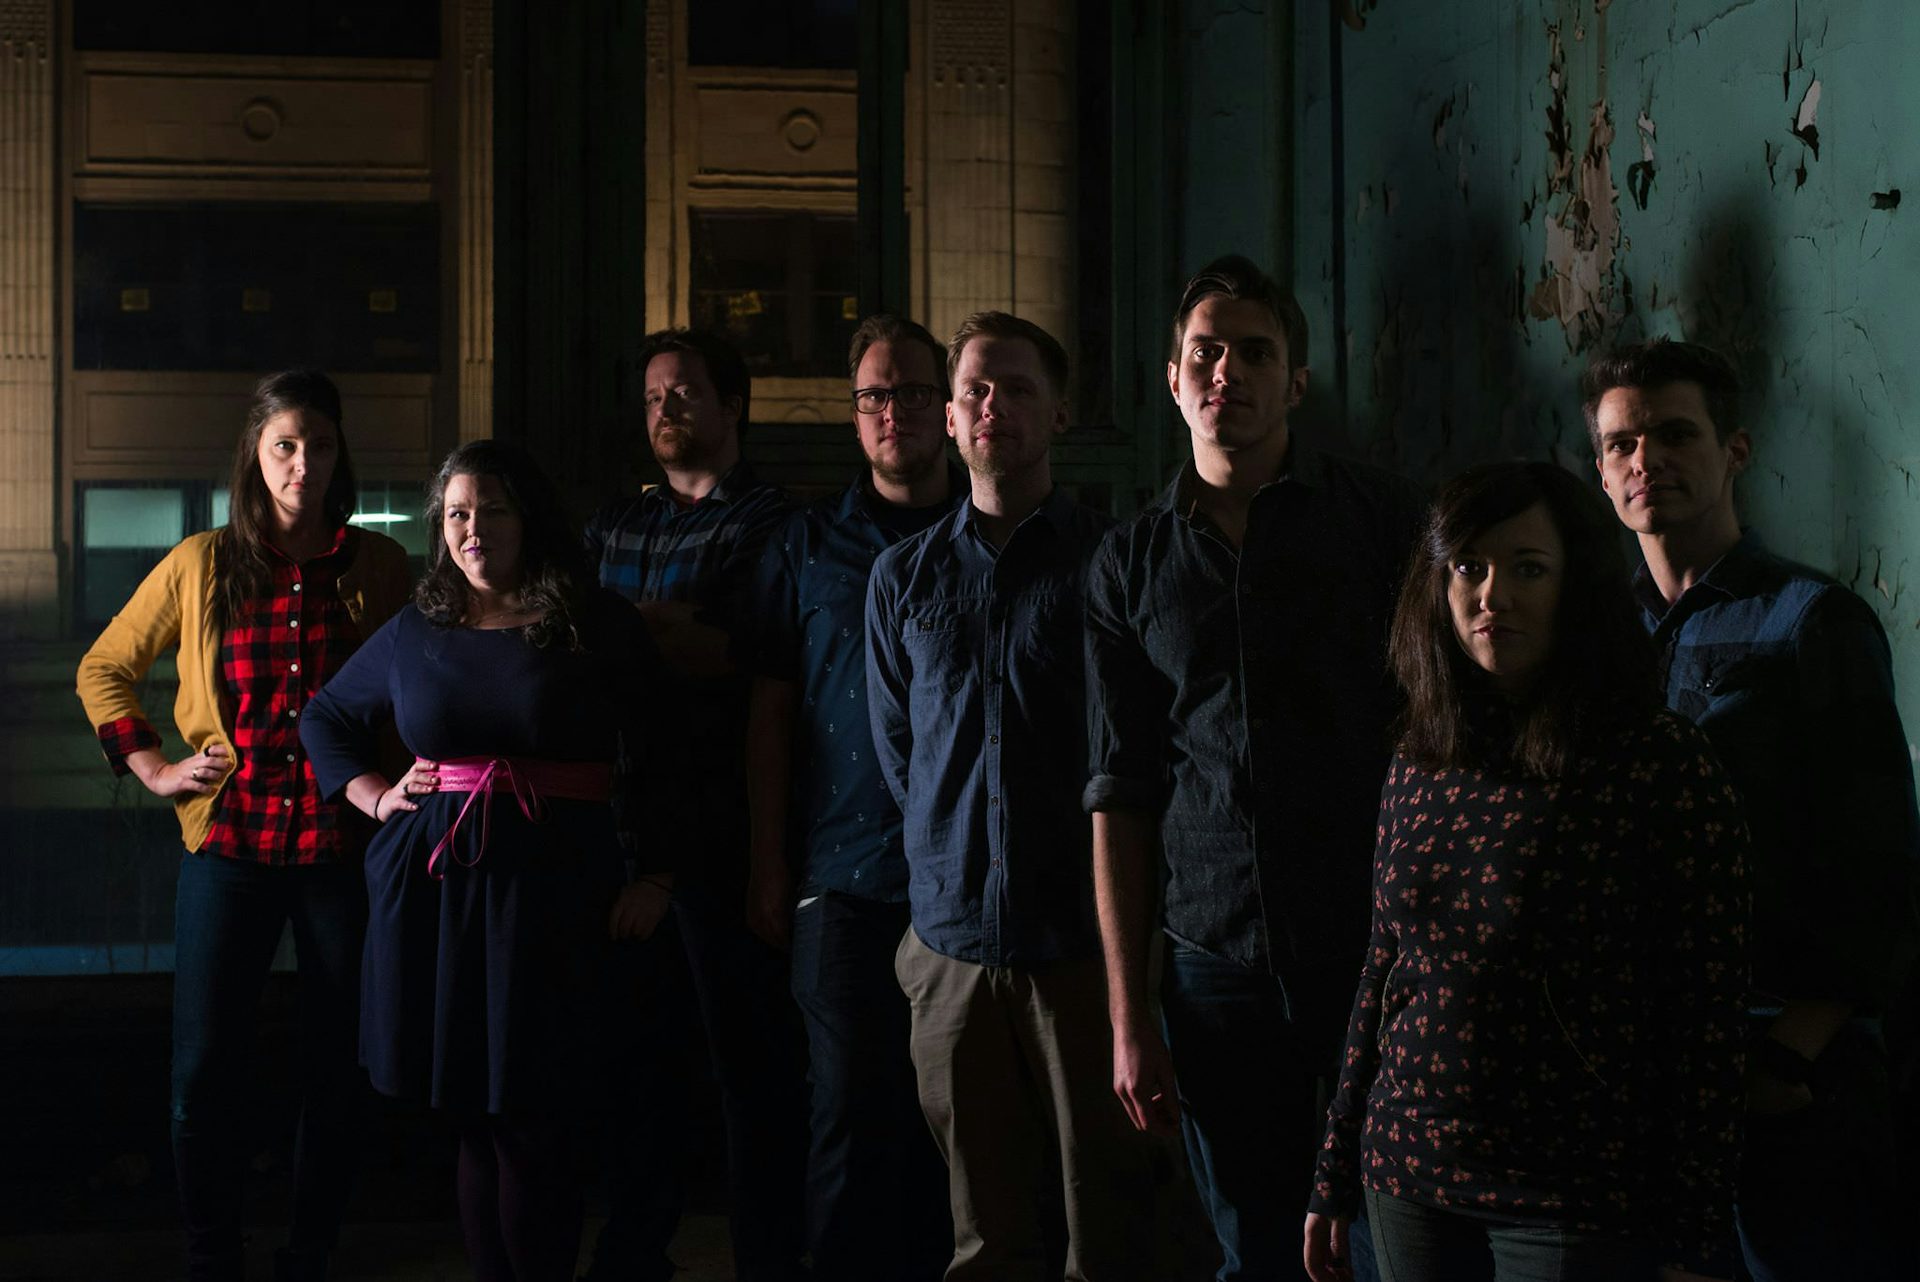 Thee classic improv troupe in an abandoned building.  (📸️ Photo by Mike Rubino)